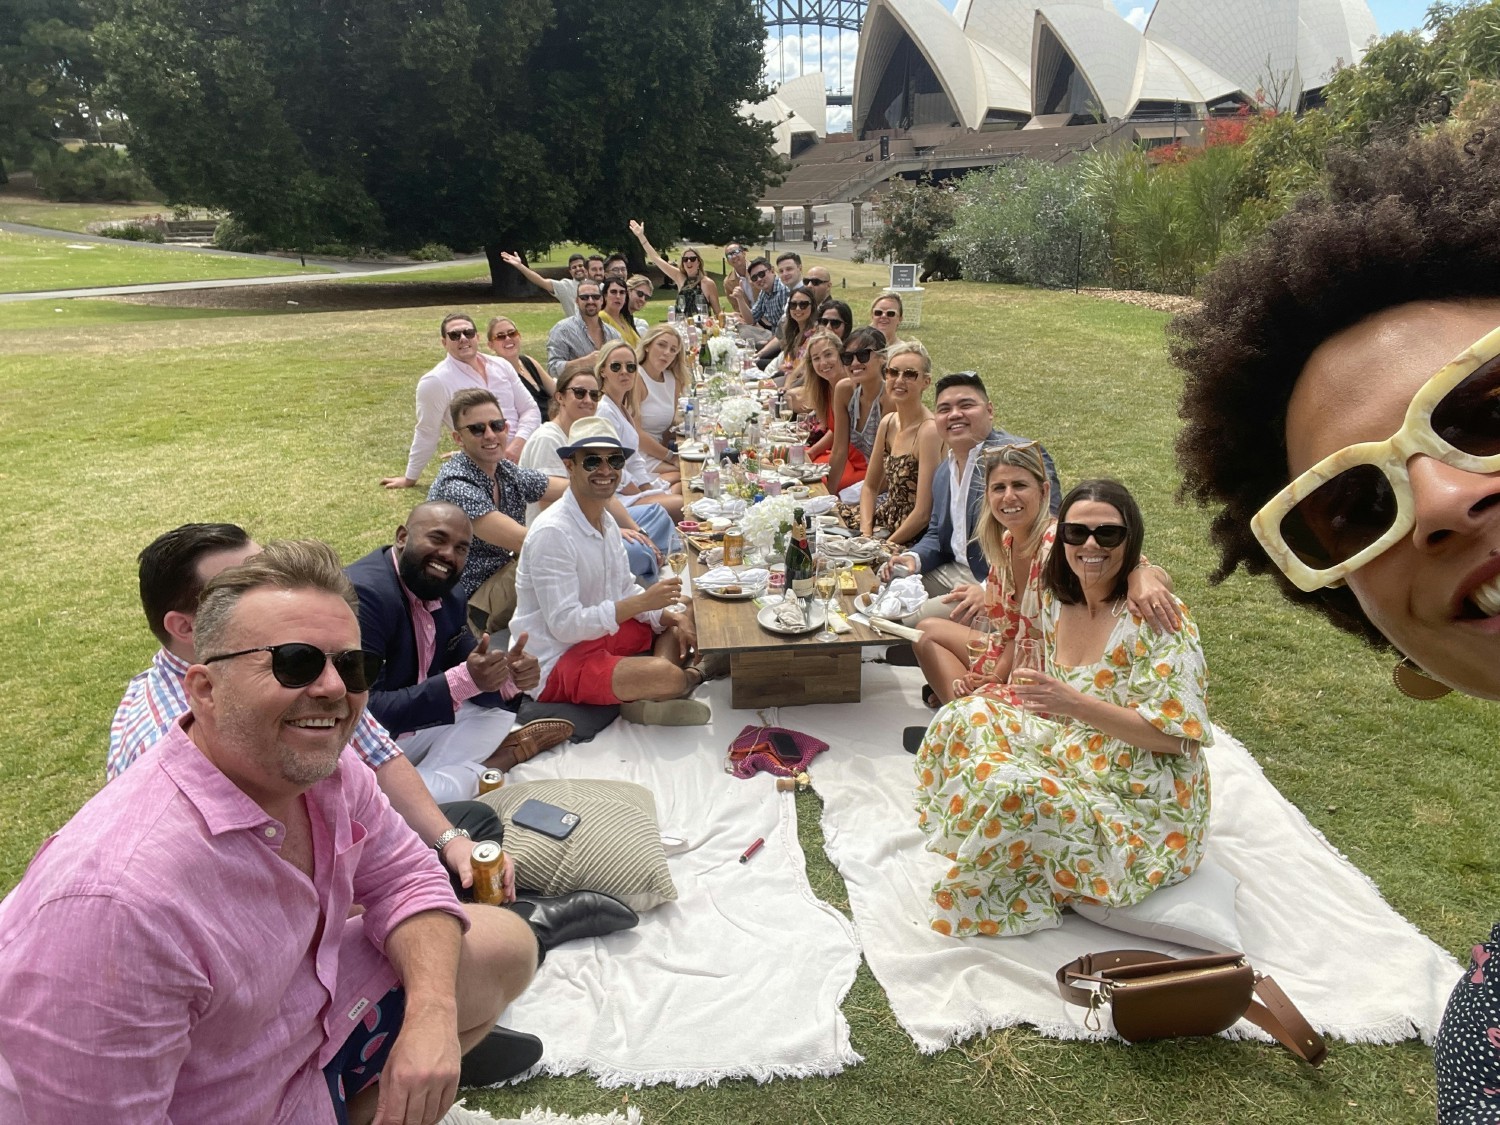 The monday.com team in Australia enjoying a picnic in the park.